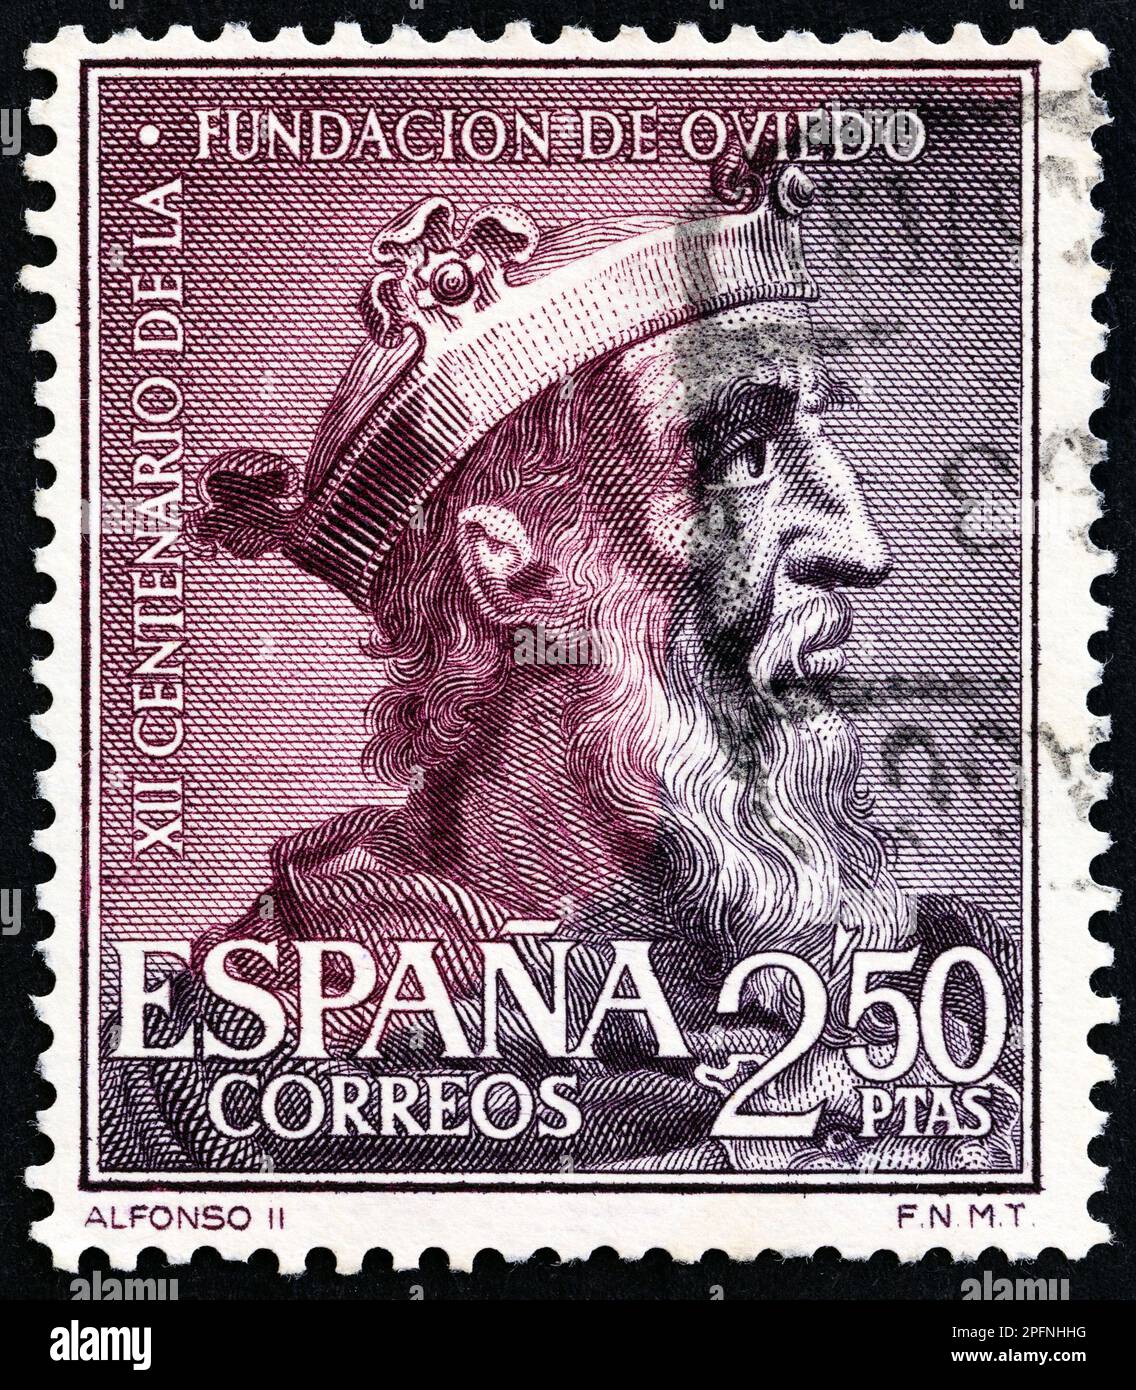 SPAIN - CIRCA 1961: A stamp printed in Spain issued for the 1200th anniversary of Oviedo  shows Alfonso II, king of Asturias, circa 1961. Stock Photo